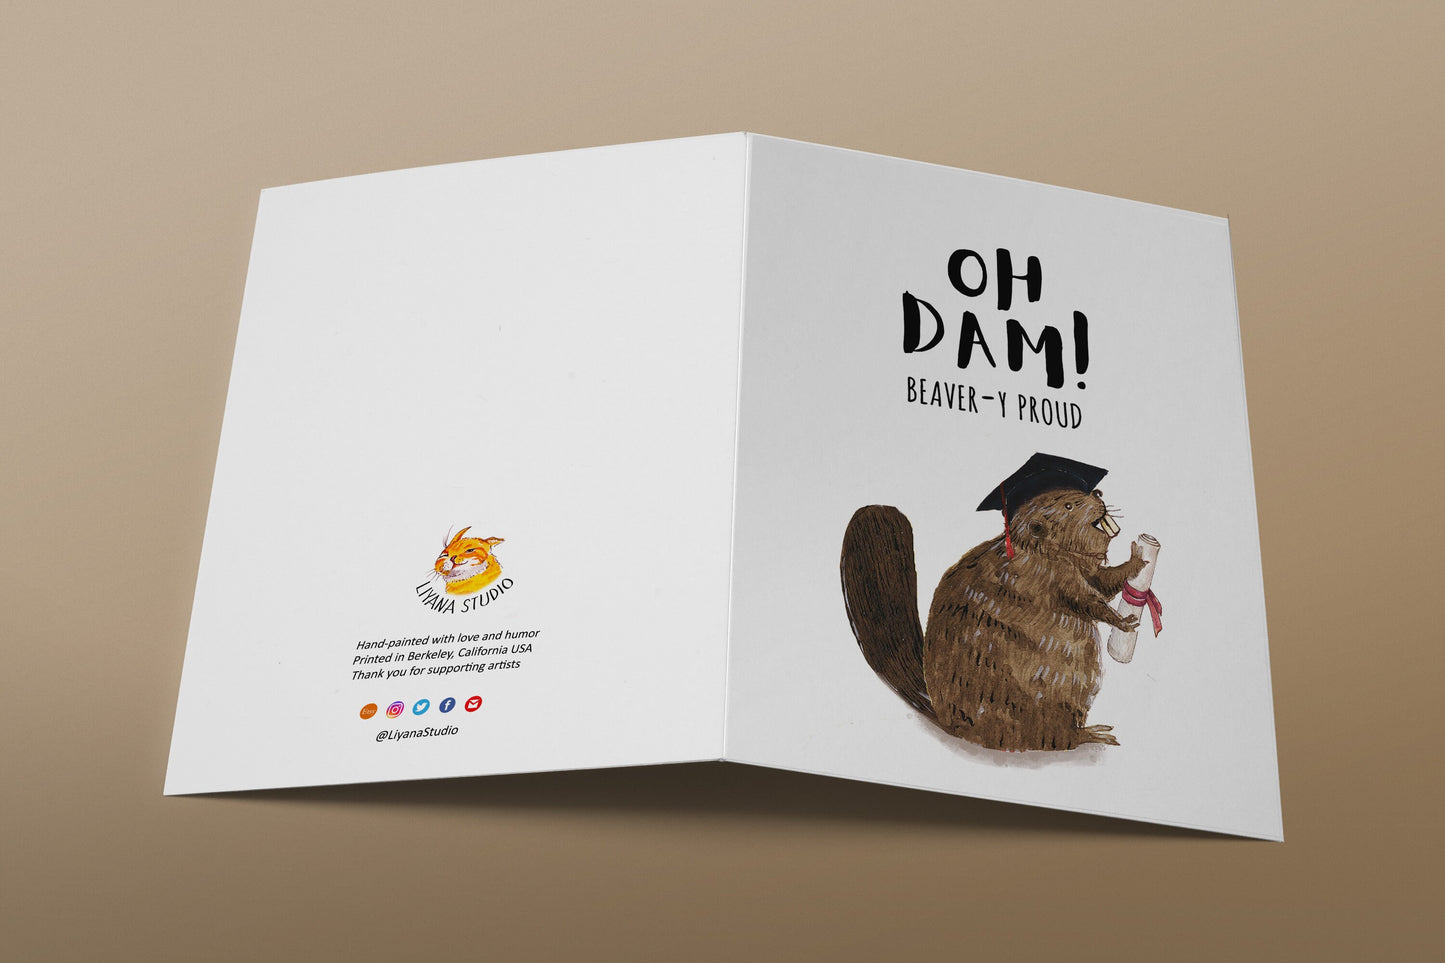 Beaver Funny Graduation Card For Son - Oh Damn Proud Of You Graduation Gifts - Congratulations Cards